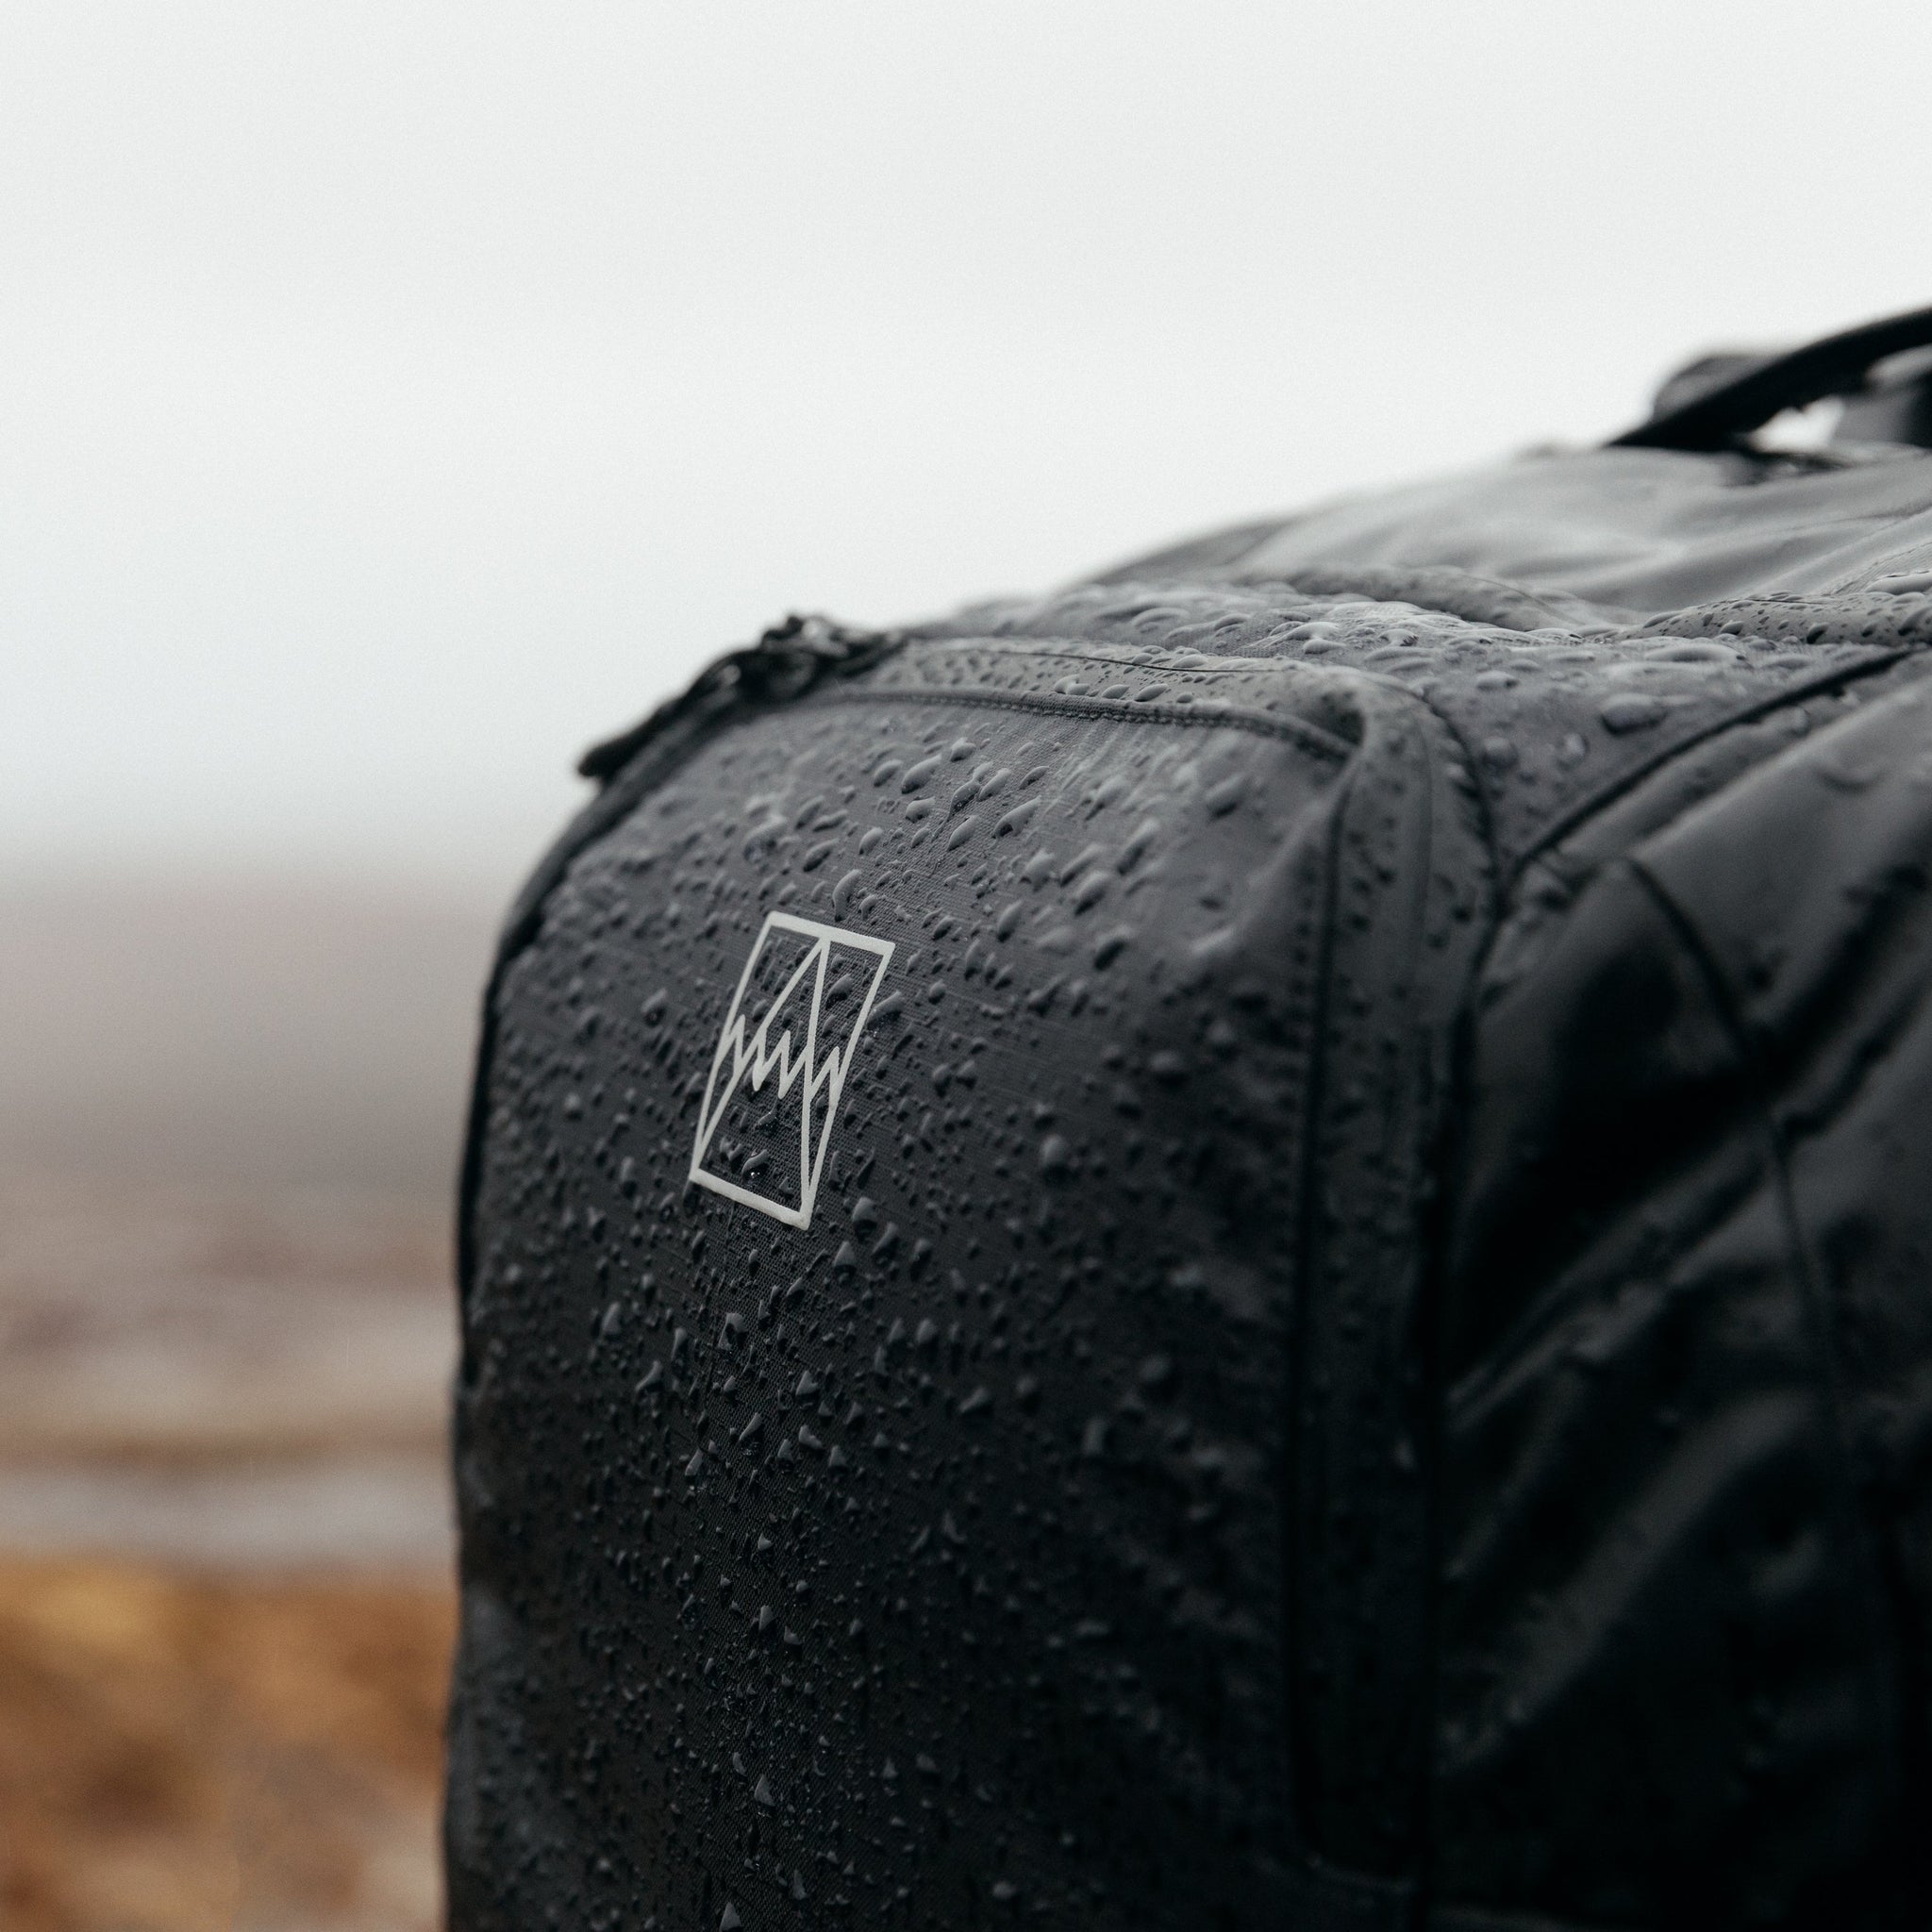 Adventure Bag in black with rain water droplets